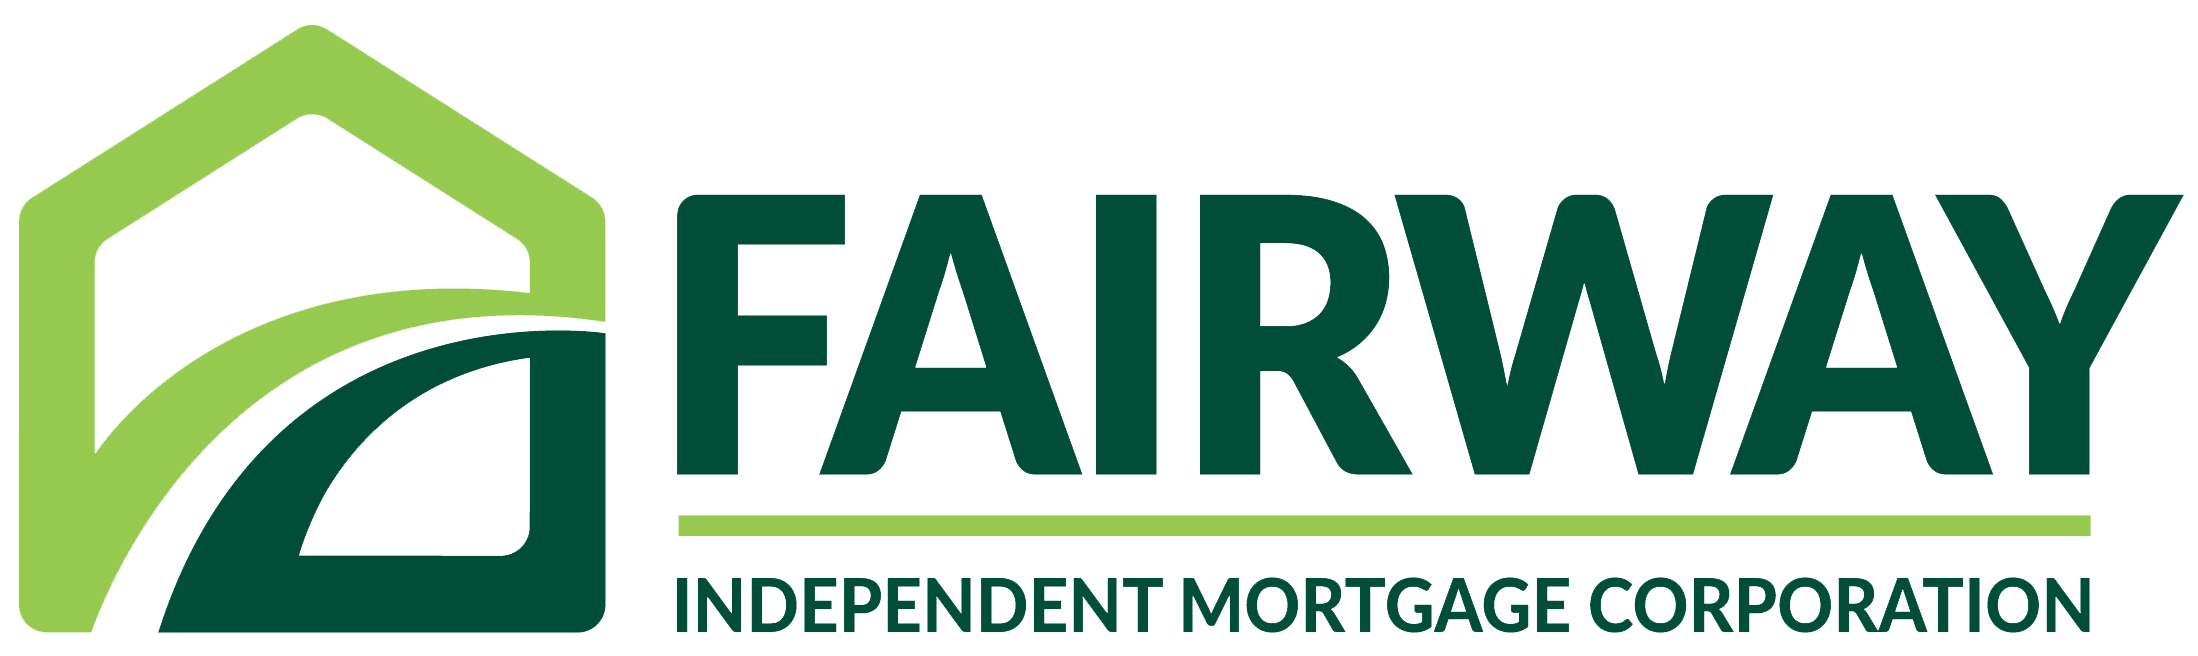 Fairway Independent Mortgage Corporation Photo